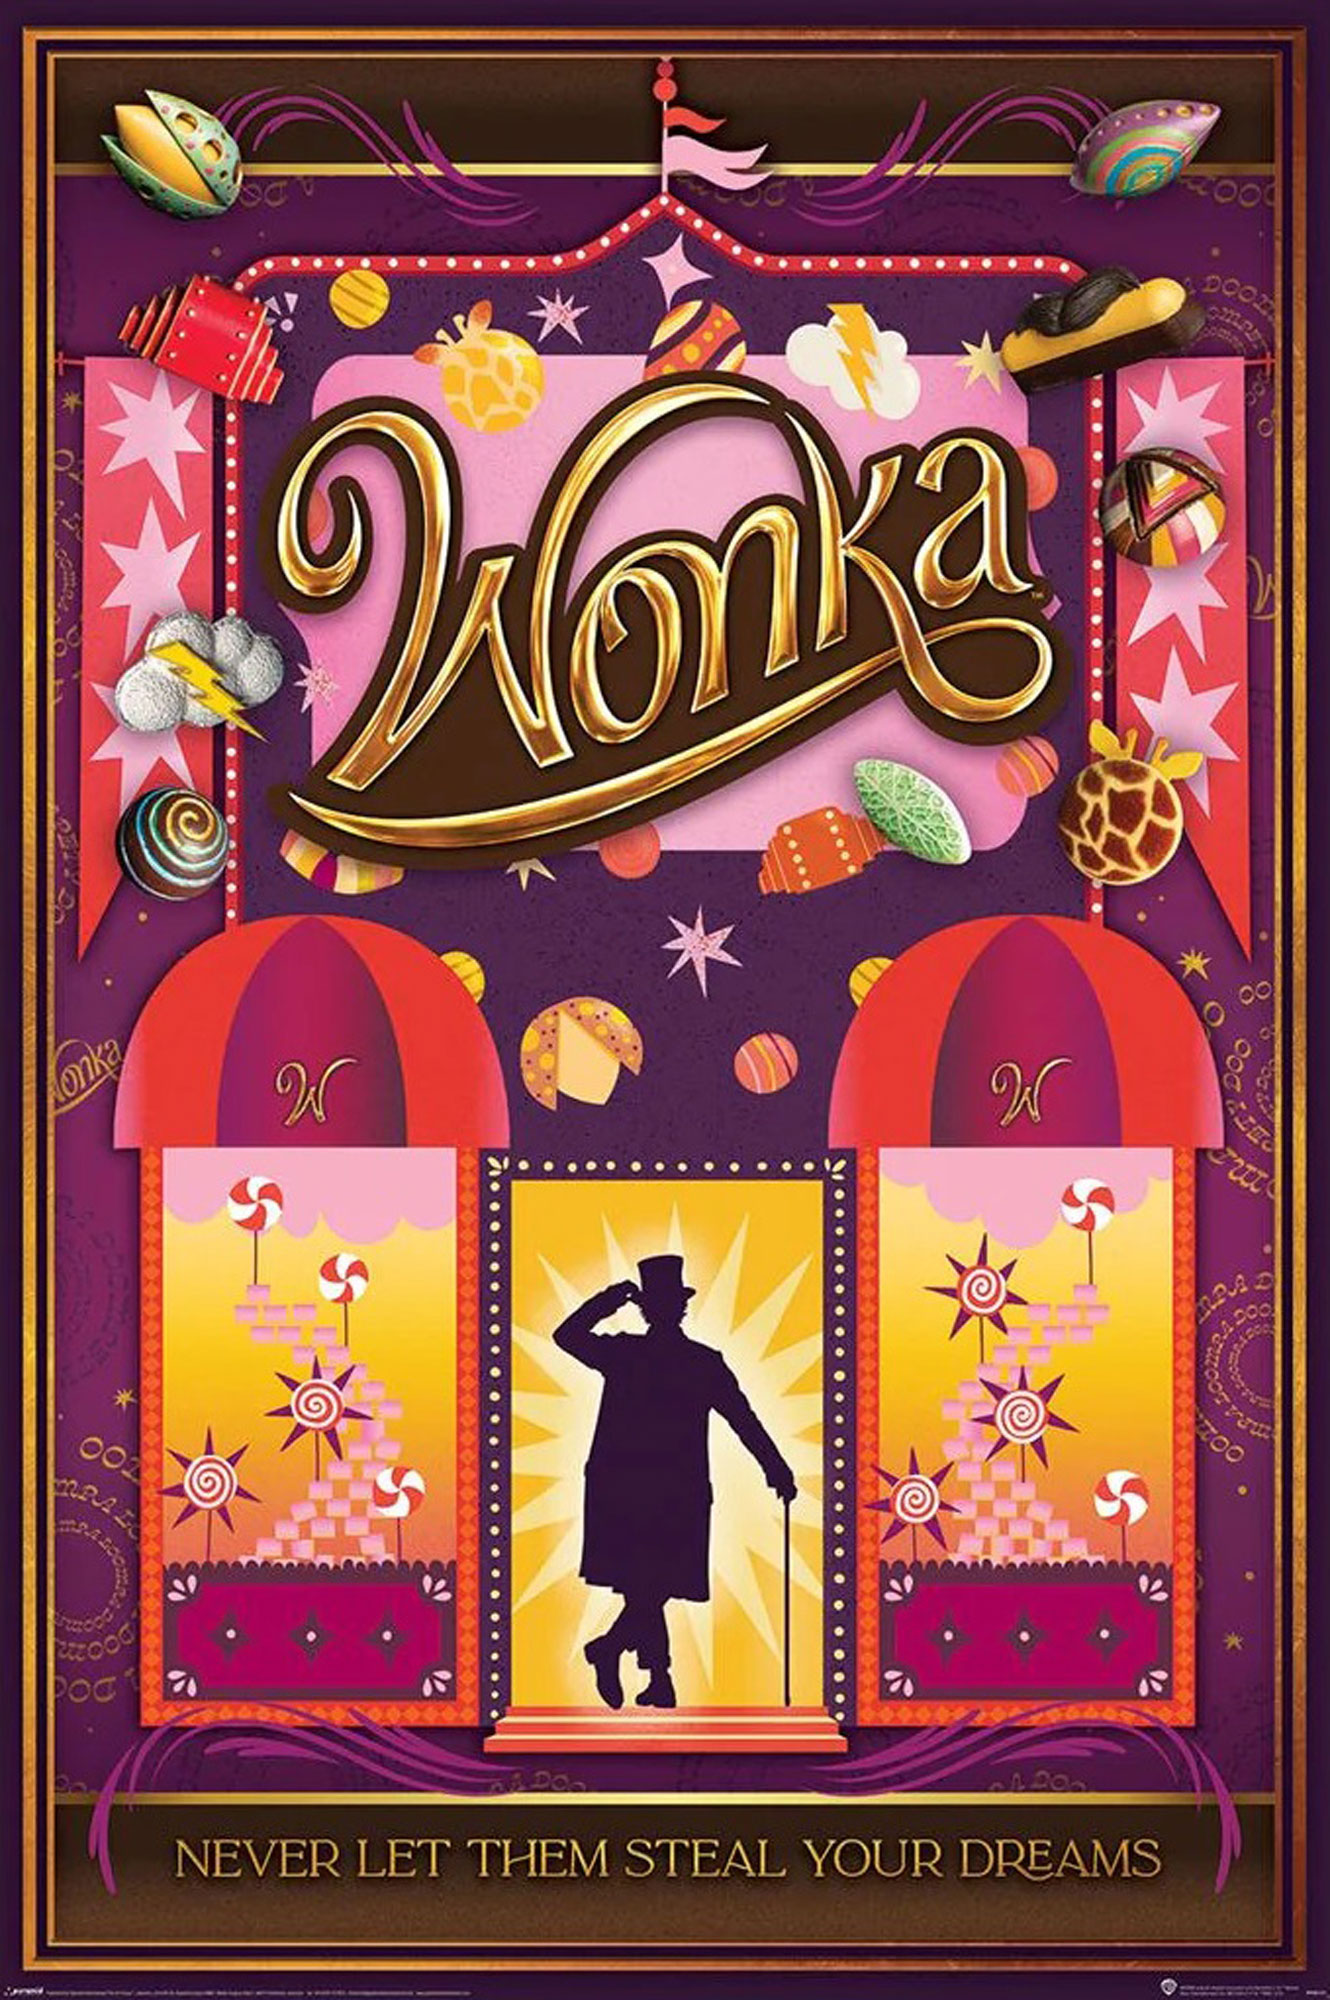 Wonka them steal - your Never Dreams let